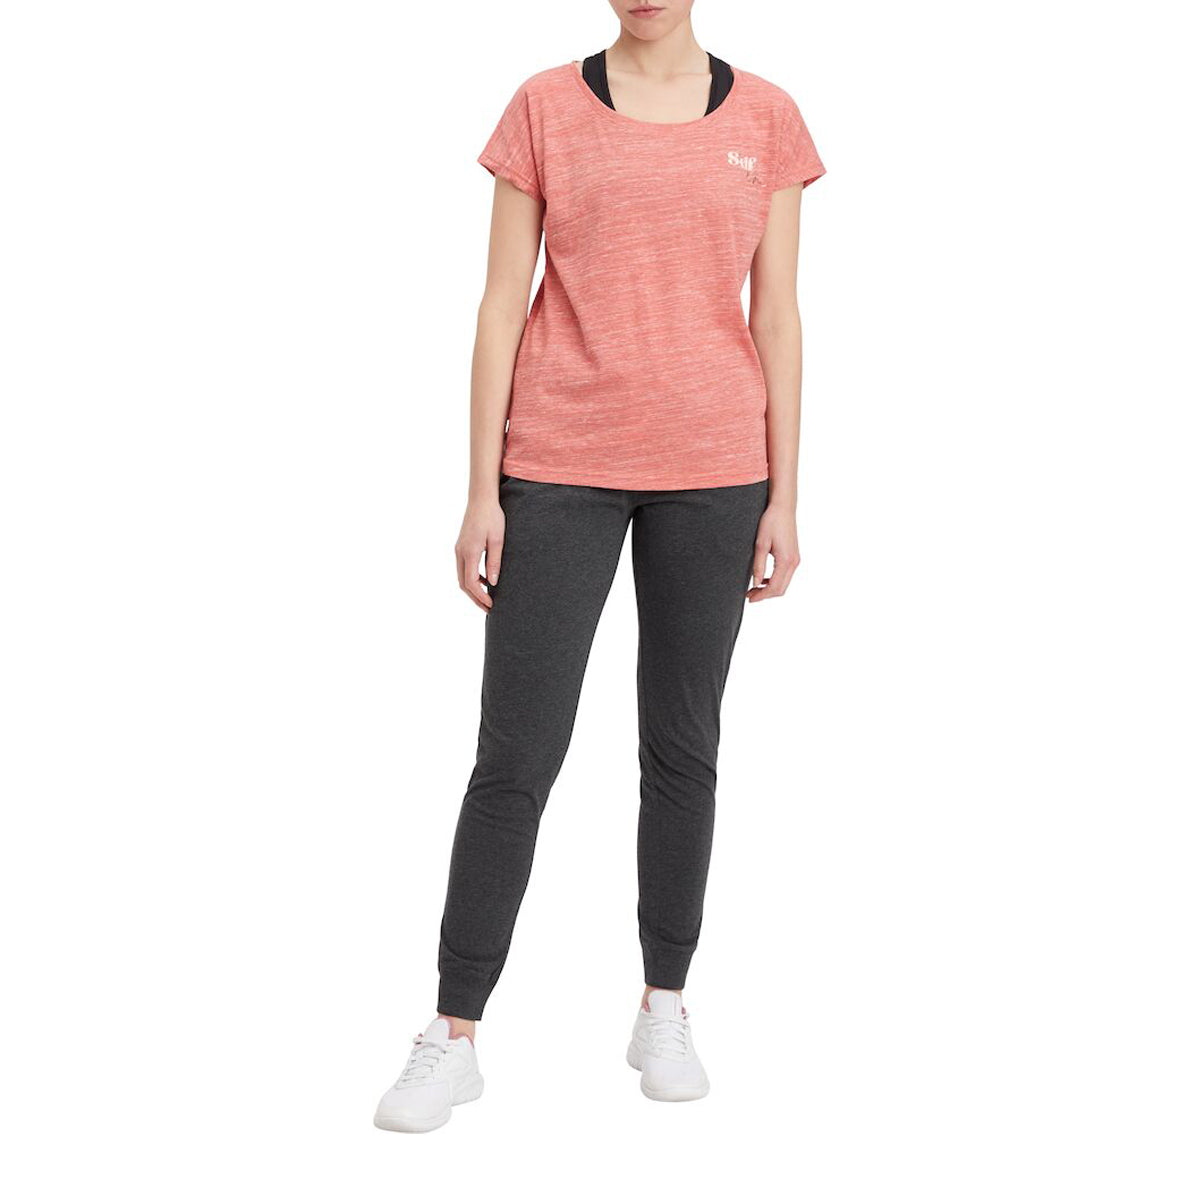 Energetics Cully Lifestyle T-Shirt For Women, Pink